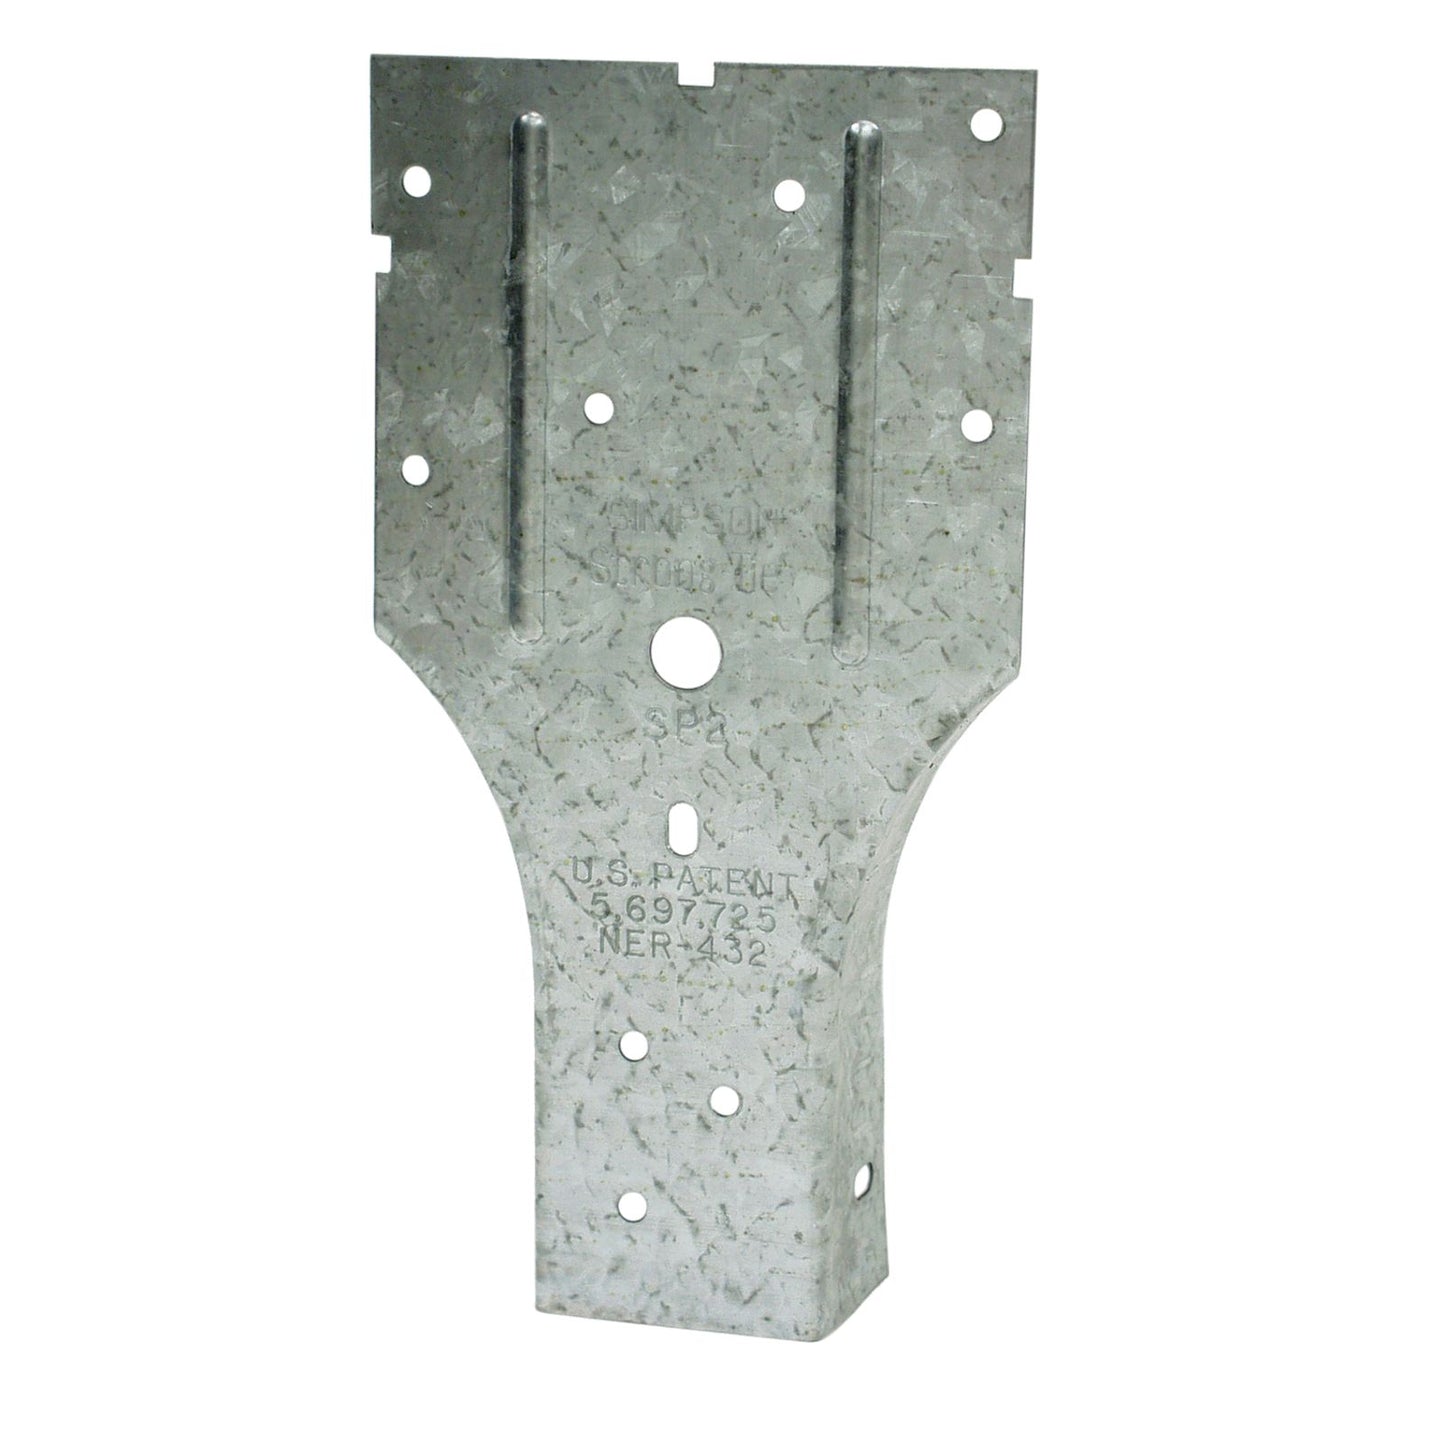 Simpson SP2 312 inch X 658 inch Stud Plate Tie Galvanized image 1 of 2